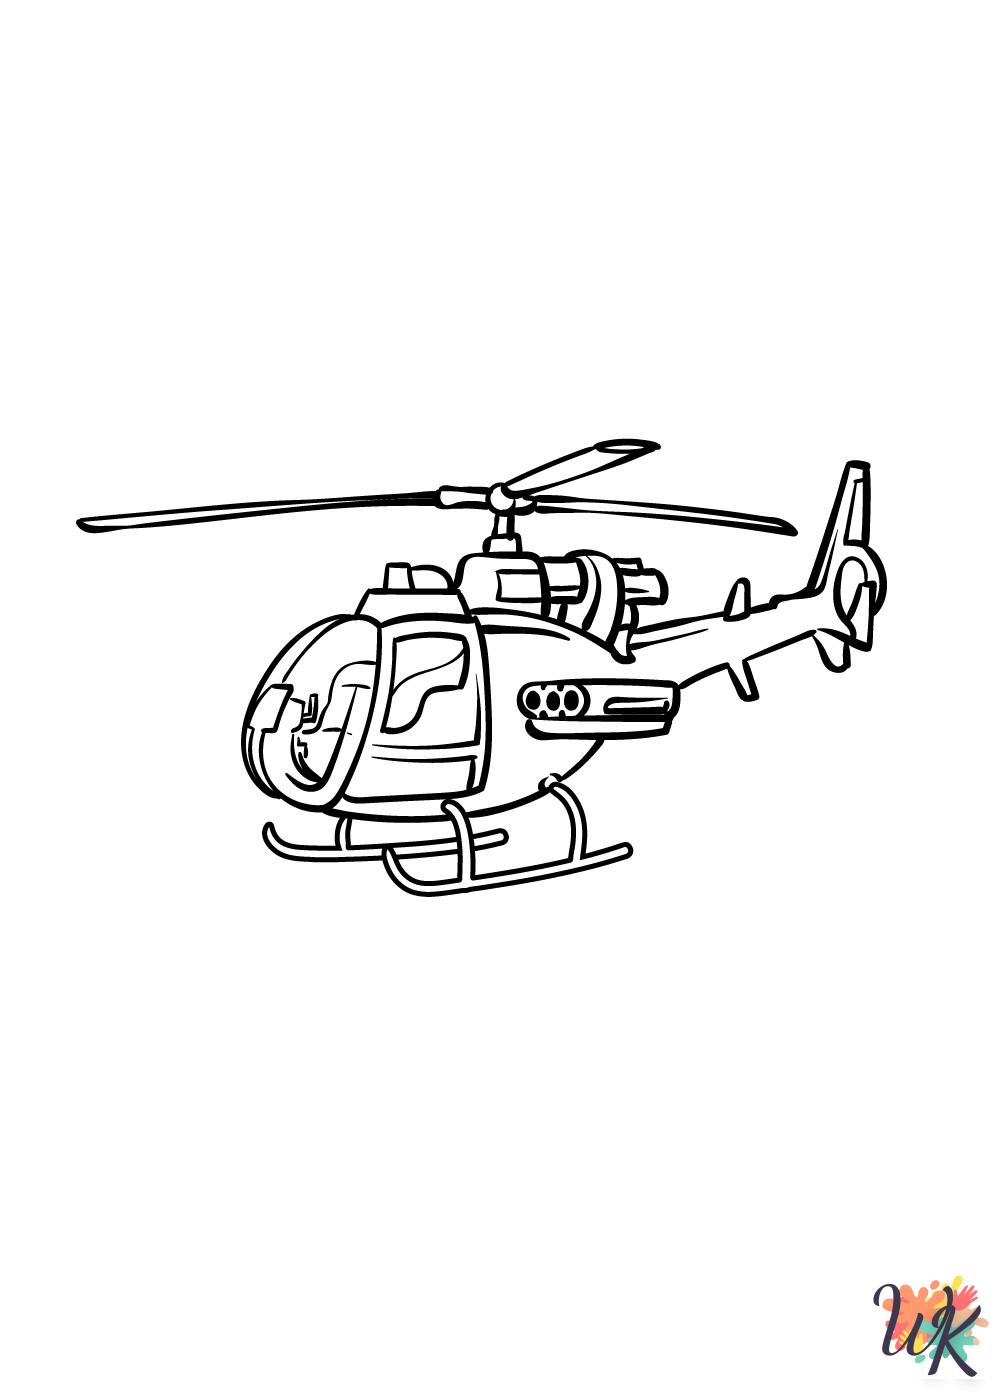 Helicopter coloring pages for adults pdf